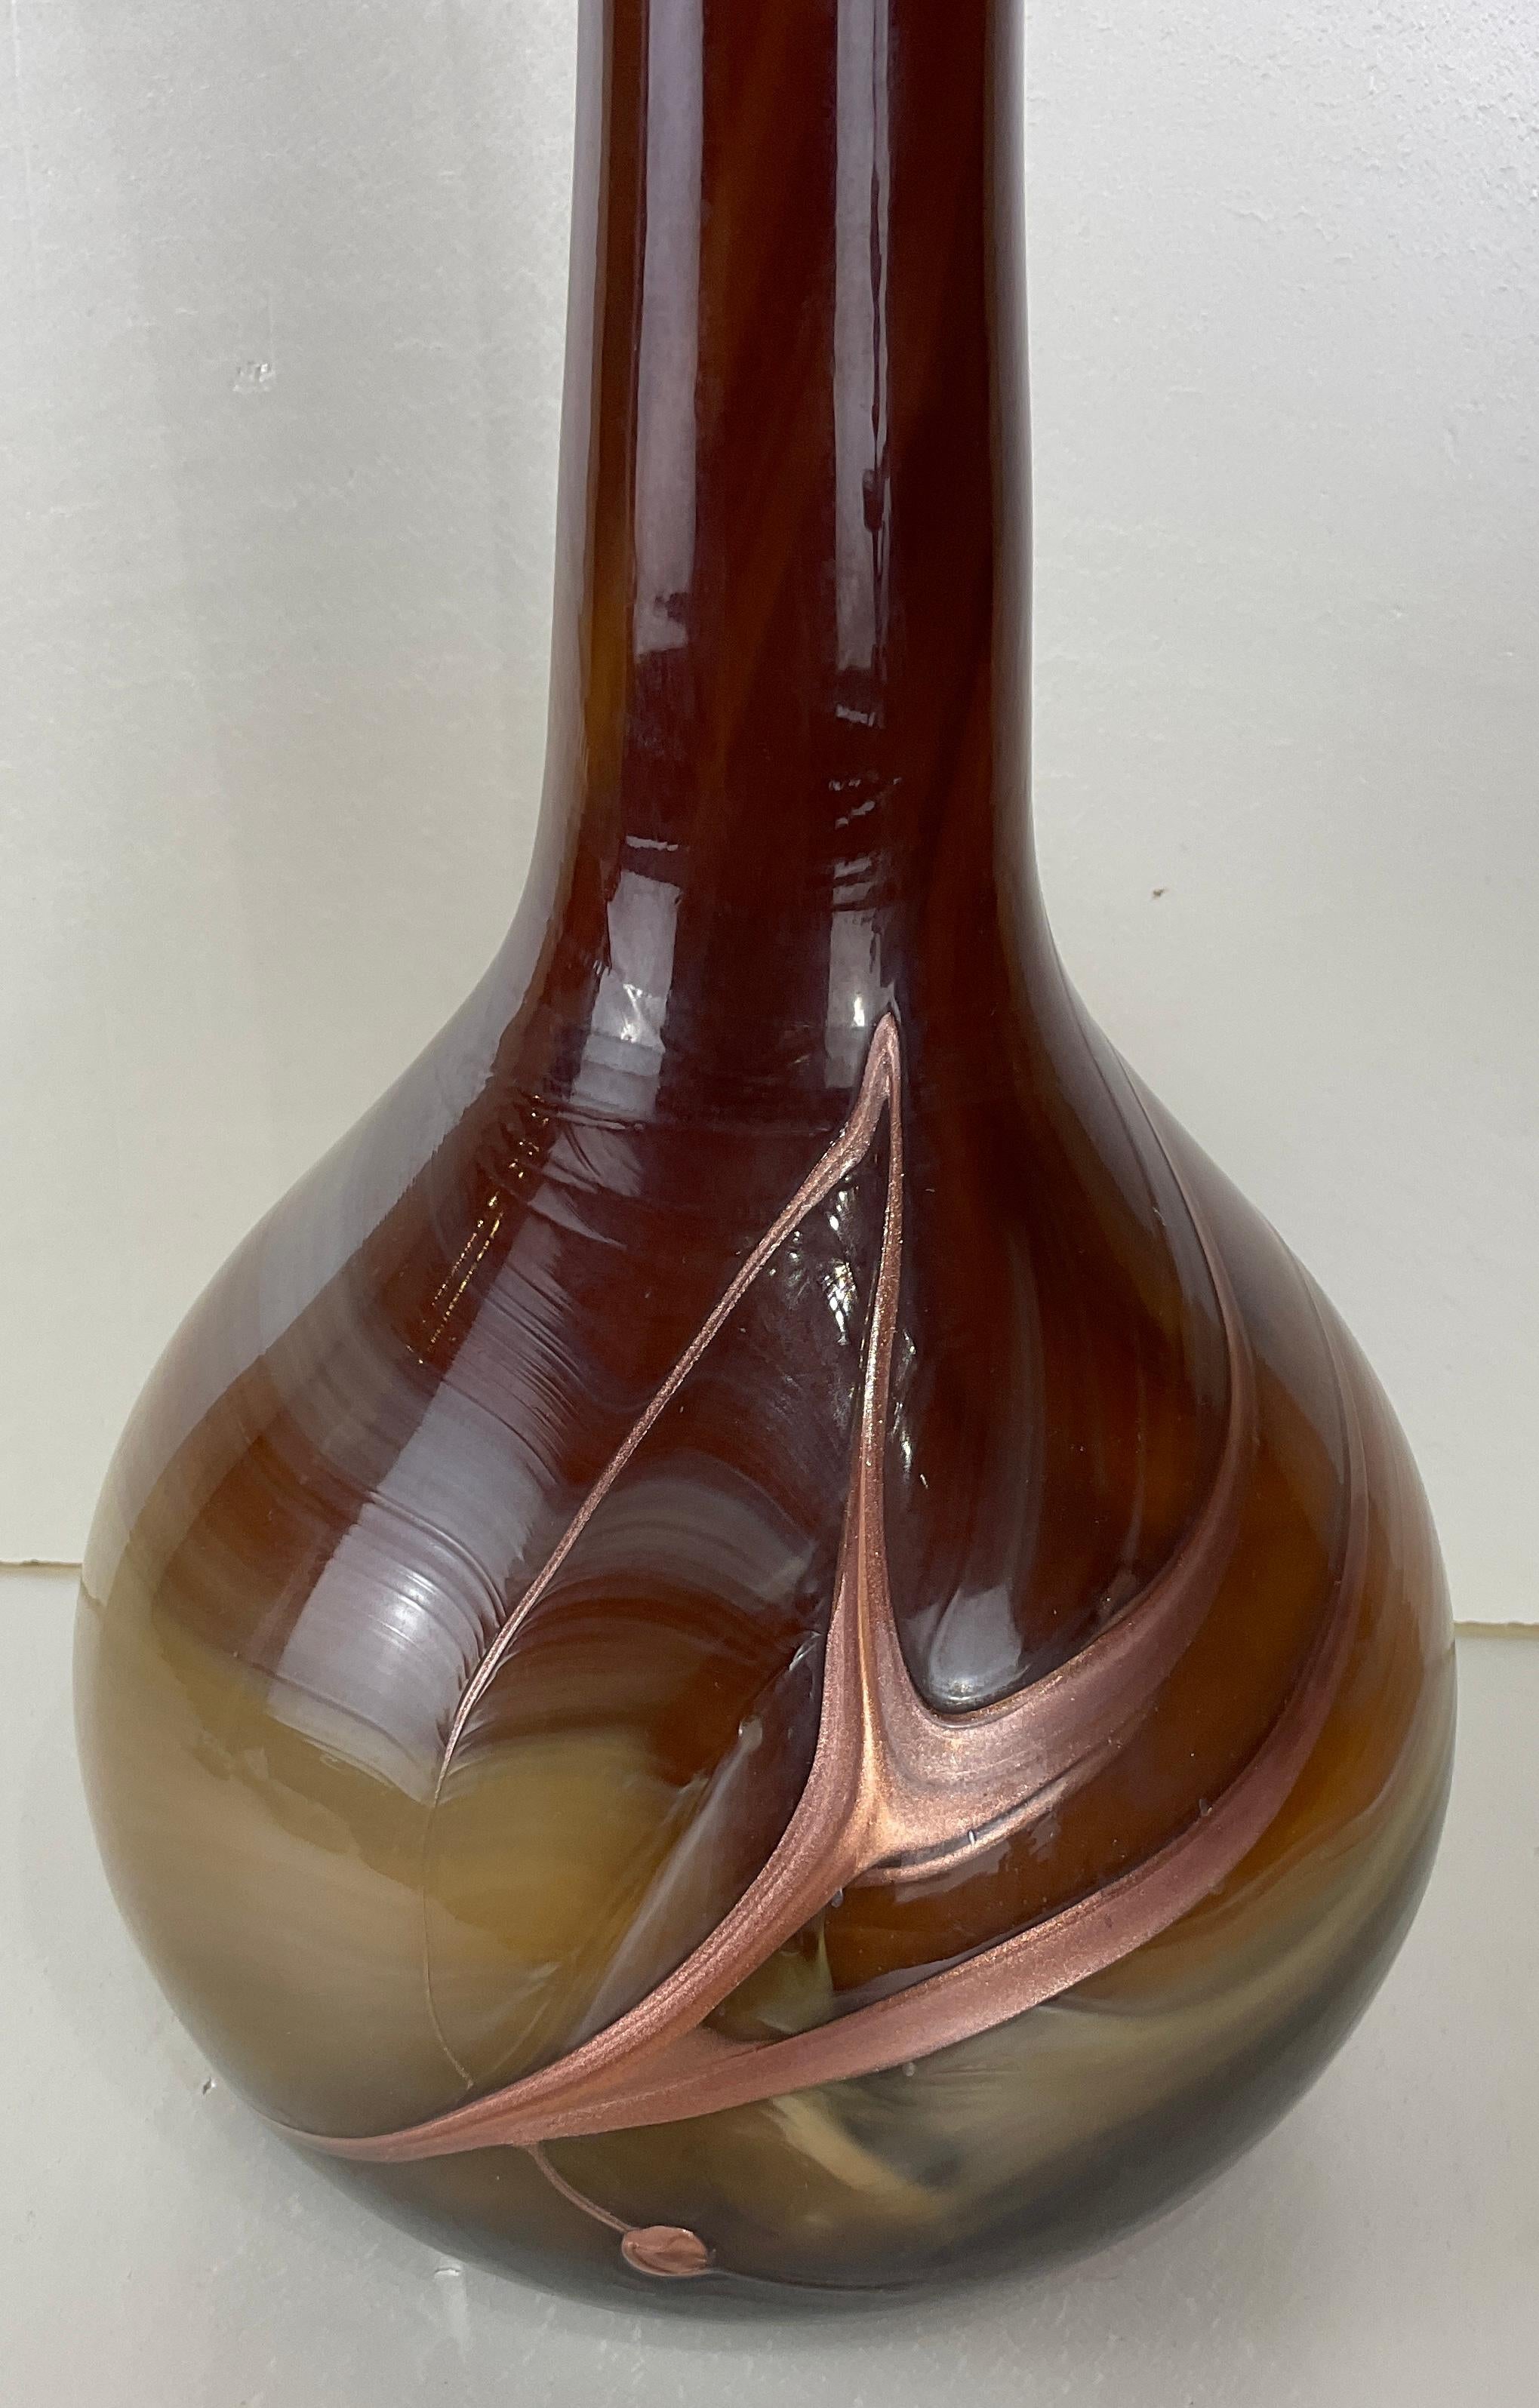 Unique and sophisticated, this vase is crafted of mouth-blown 